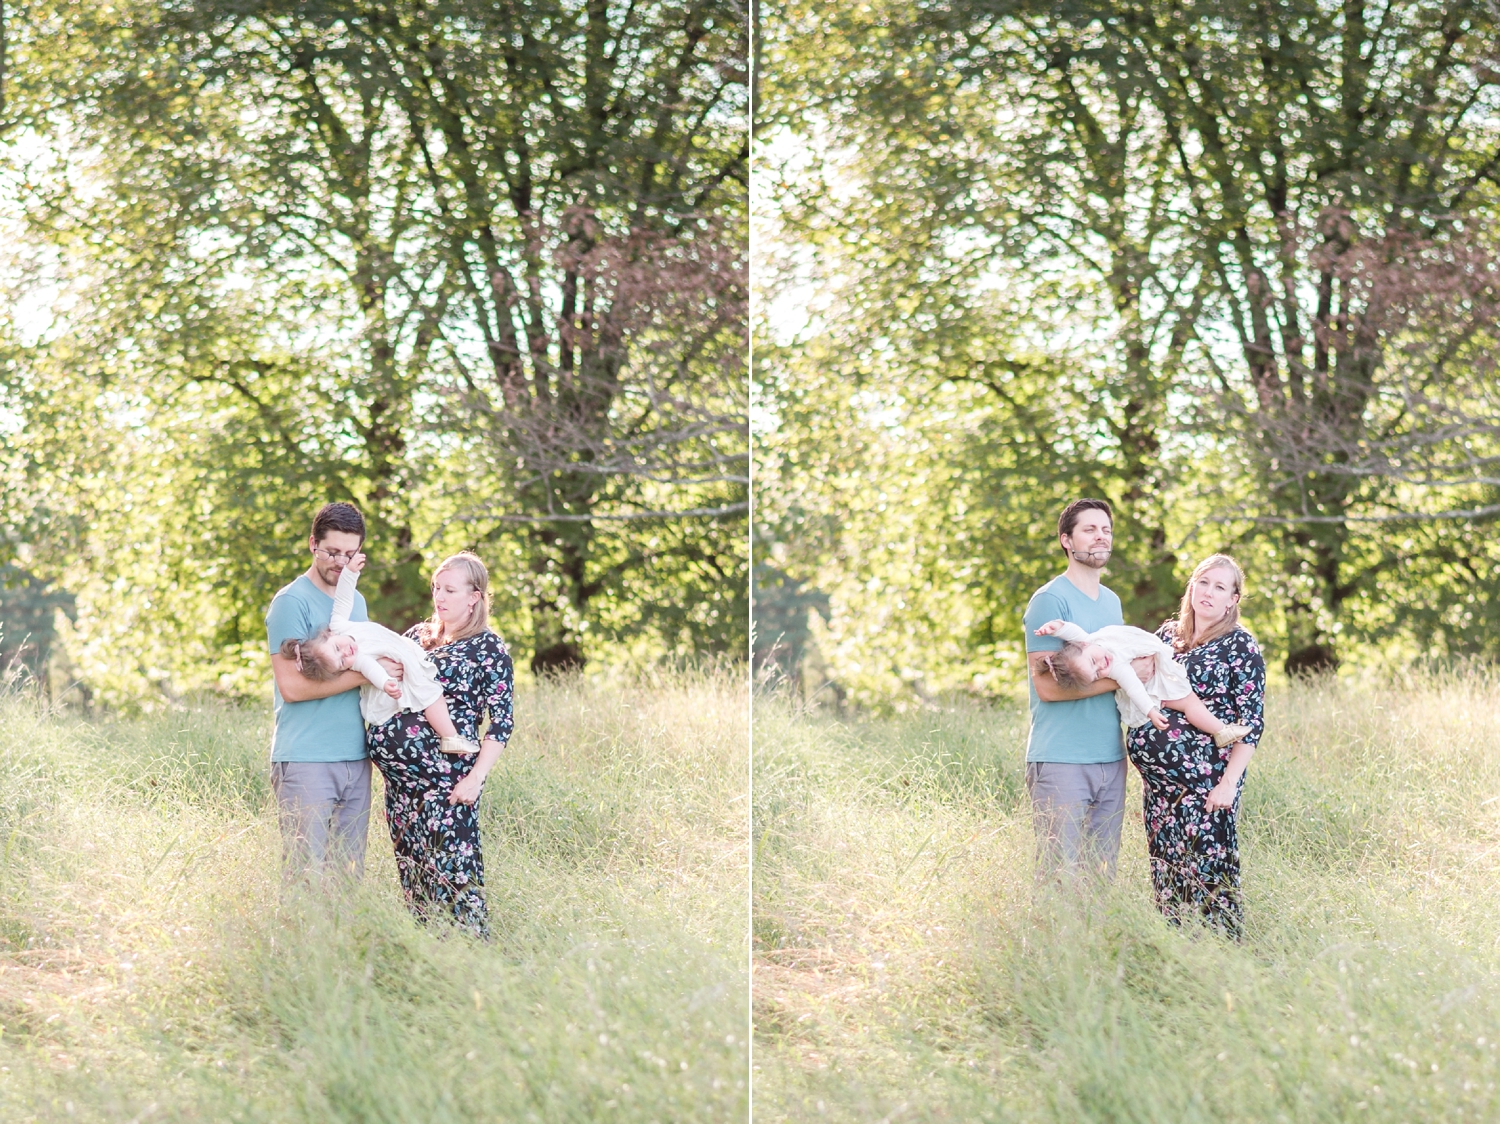  Yep, every family shoot! A baby trying to wrangle free and throwing a tantrum. And Payton knocked Kevin’s glasses off of his head. Haha!! 